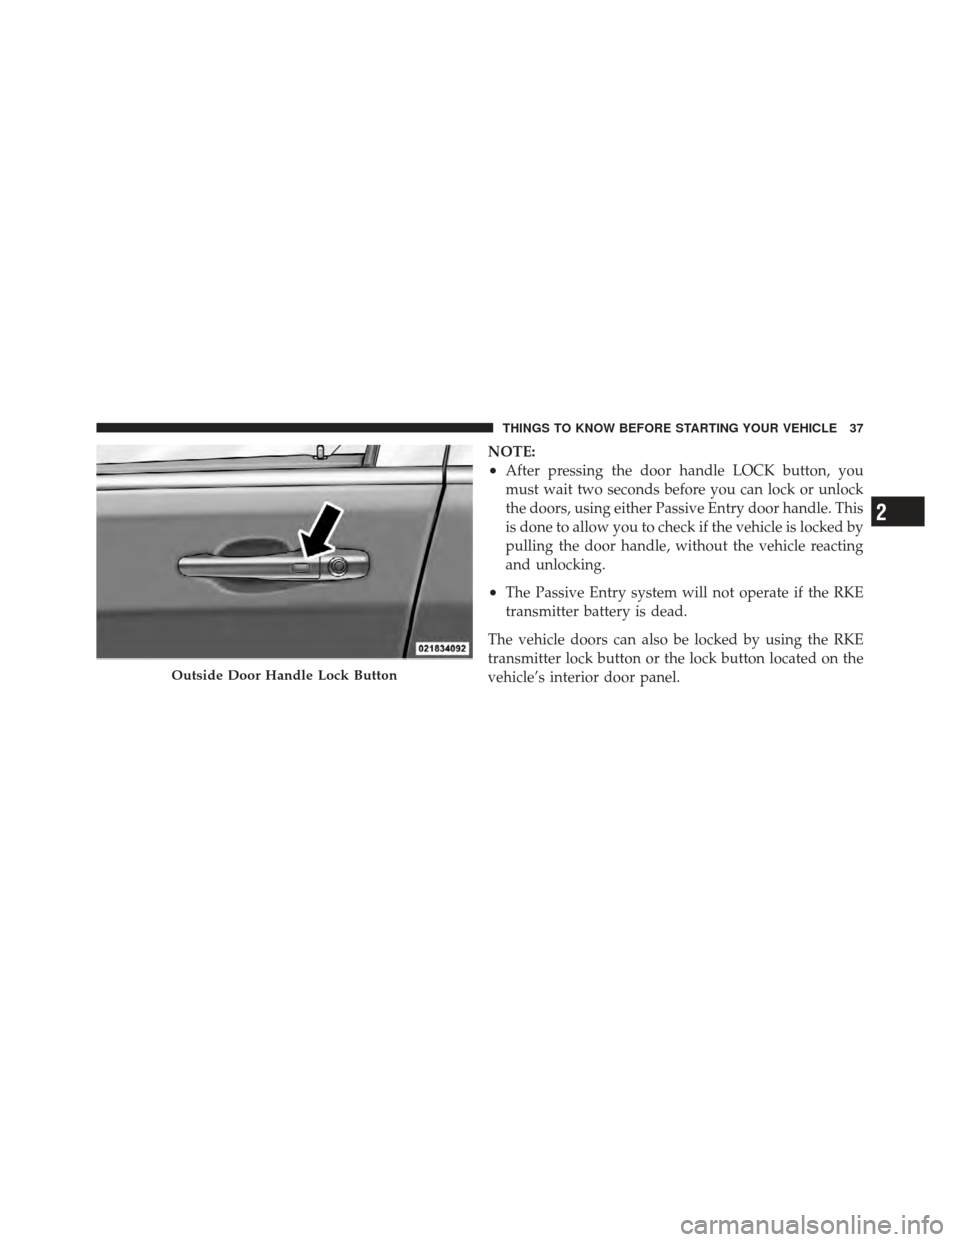 CHRYSLER 300 2011 2.G Owners Manual NOTE:
•After pressing the door handle LOCK button, you
must wait two seconds before you can lock or unlock
the doors, using either Passive Entry door handle. This
is done to allow you to check if th